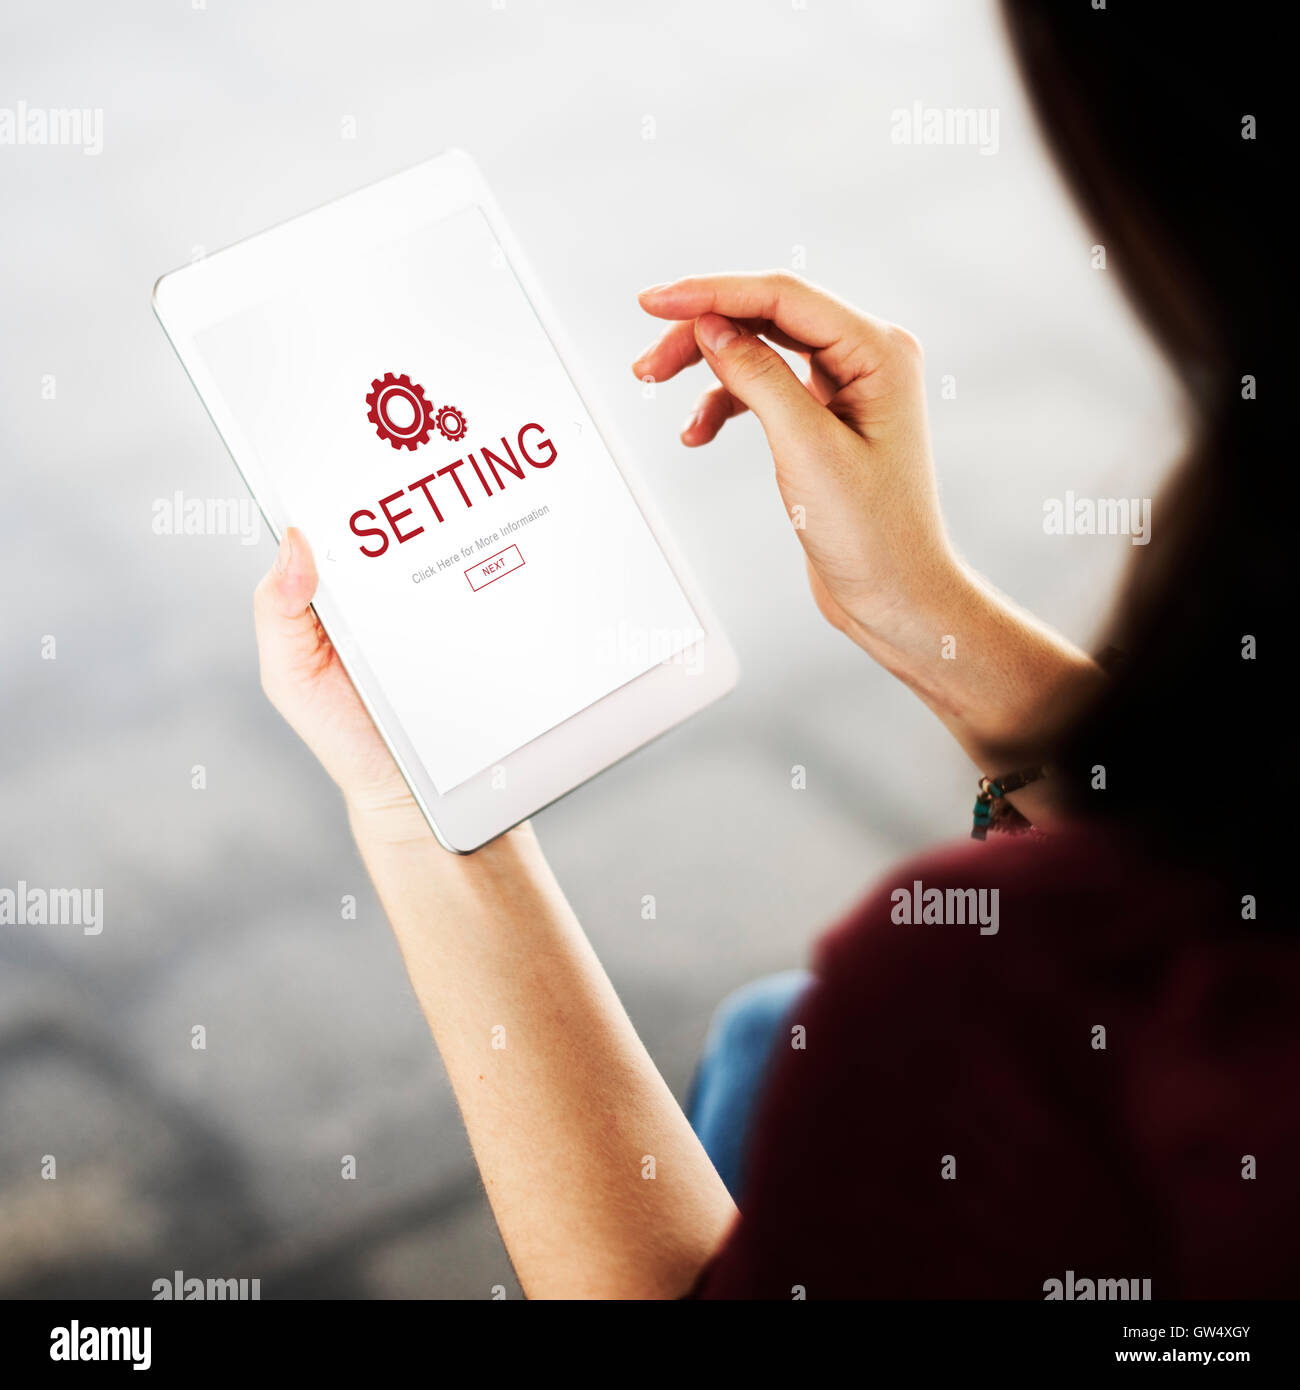 Settings Electronic Device Homepage Concept Stock Photo